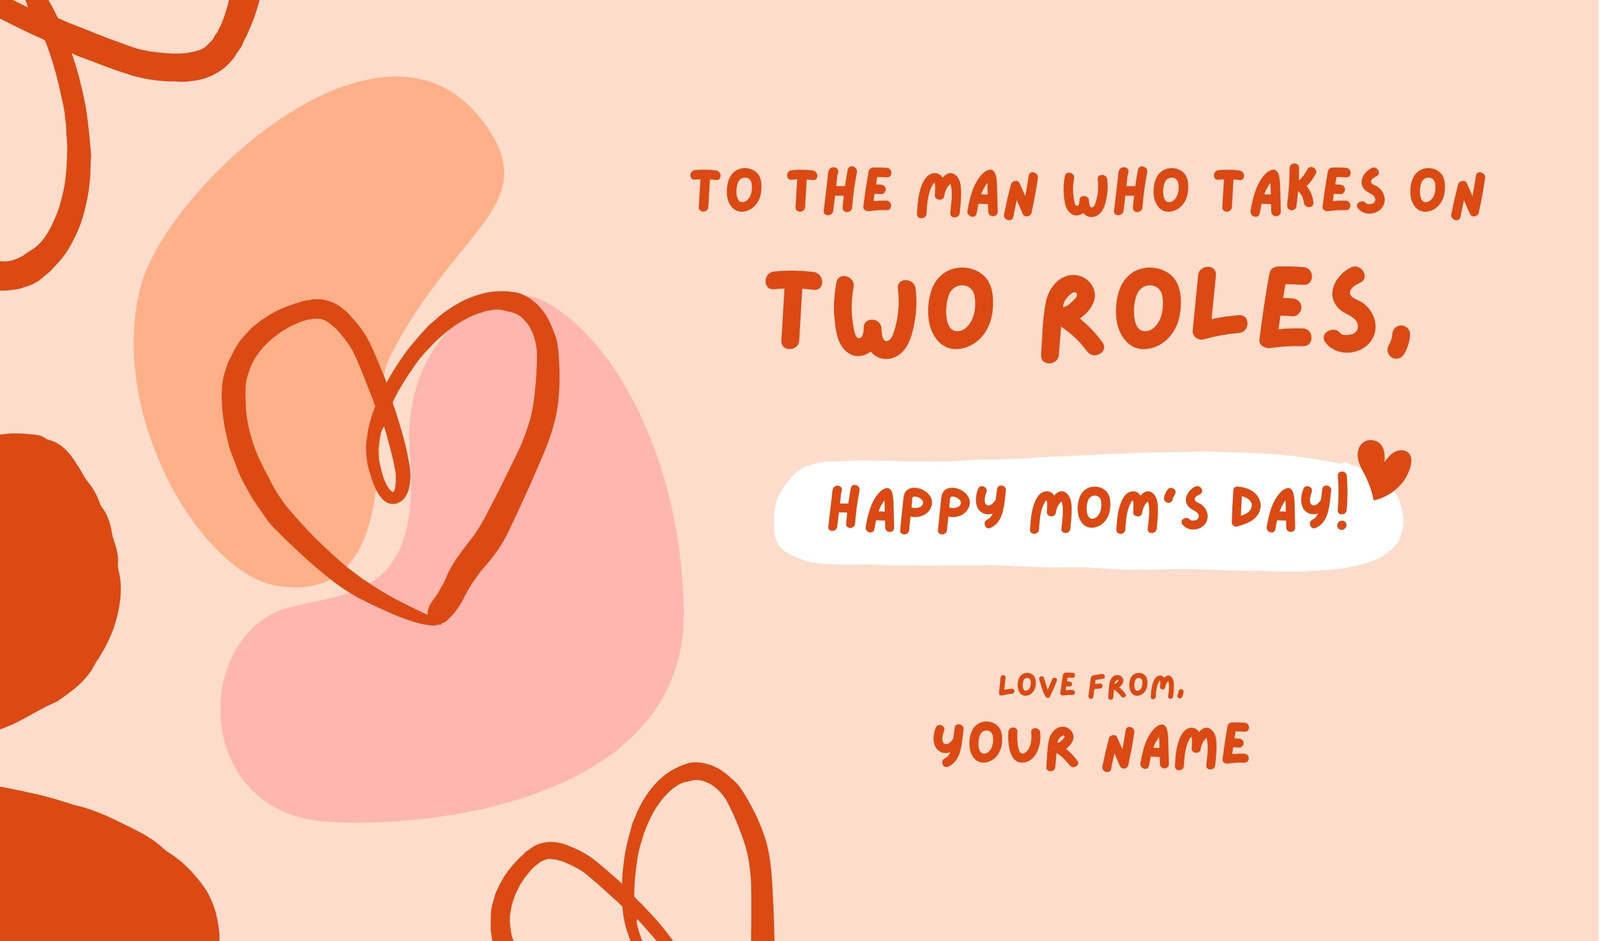 https://marketplace.canva.com/EAE7lYeQqqg/1/0/1600w/canva-light-orange-salmon-red-cute-and-friendly-personal-mother%27s-day-gift-tag-V0yejbbEBbo.jpg